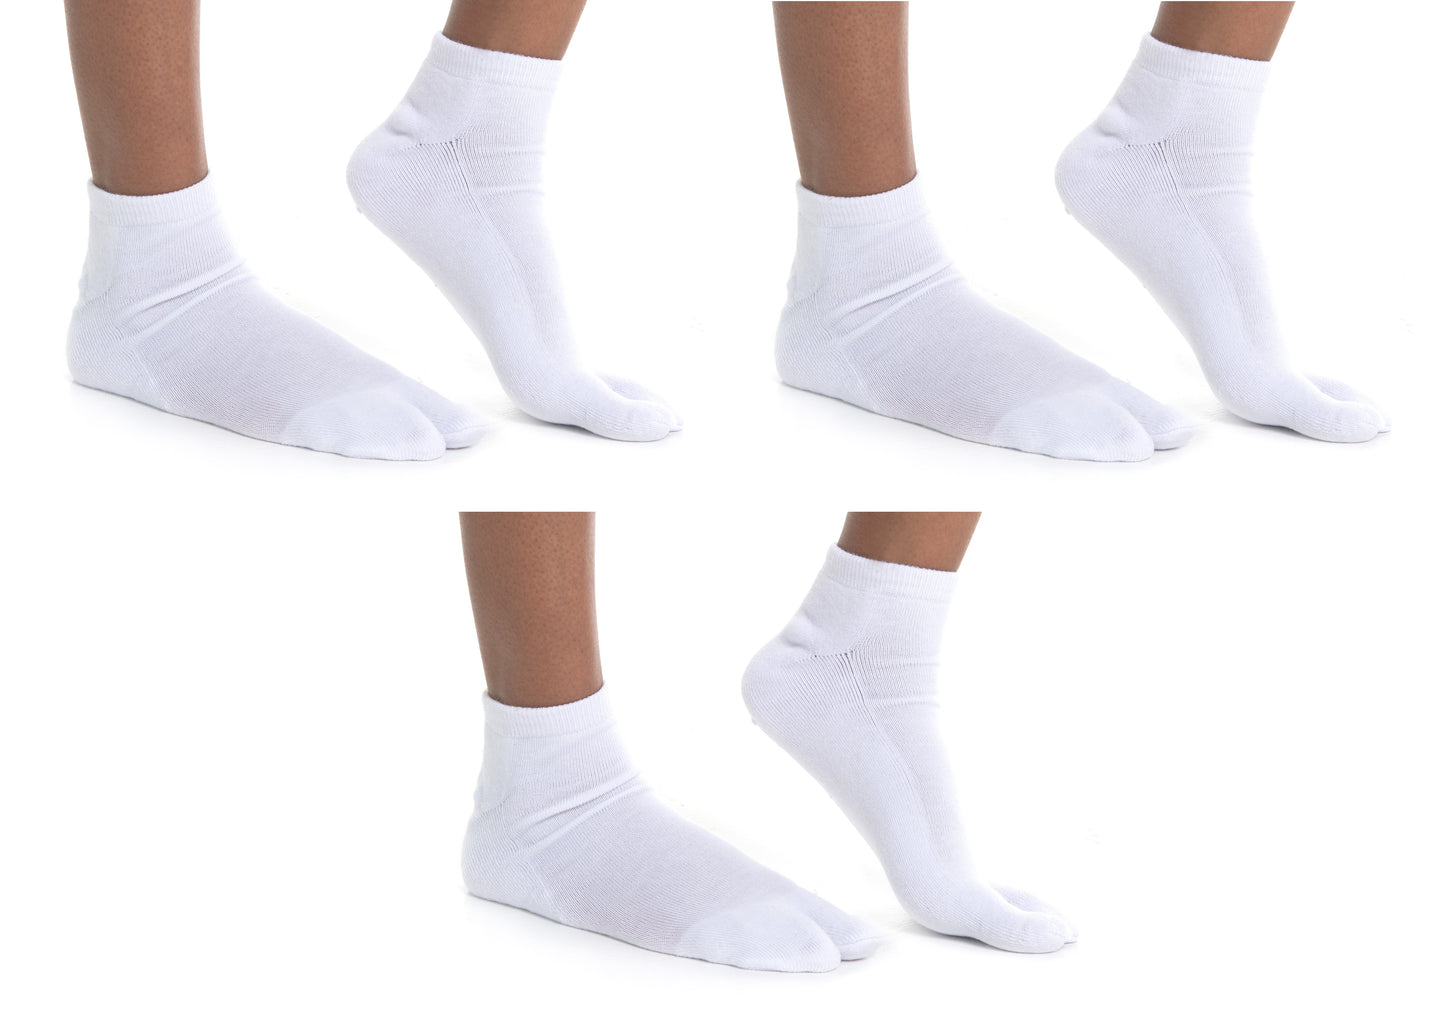 V-Toe Flip-Flop Socks Ankle Tabi 3 Pairs Thicker Comfy Warm Styles White Casual or Athletic